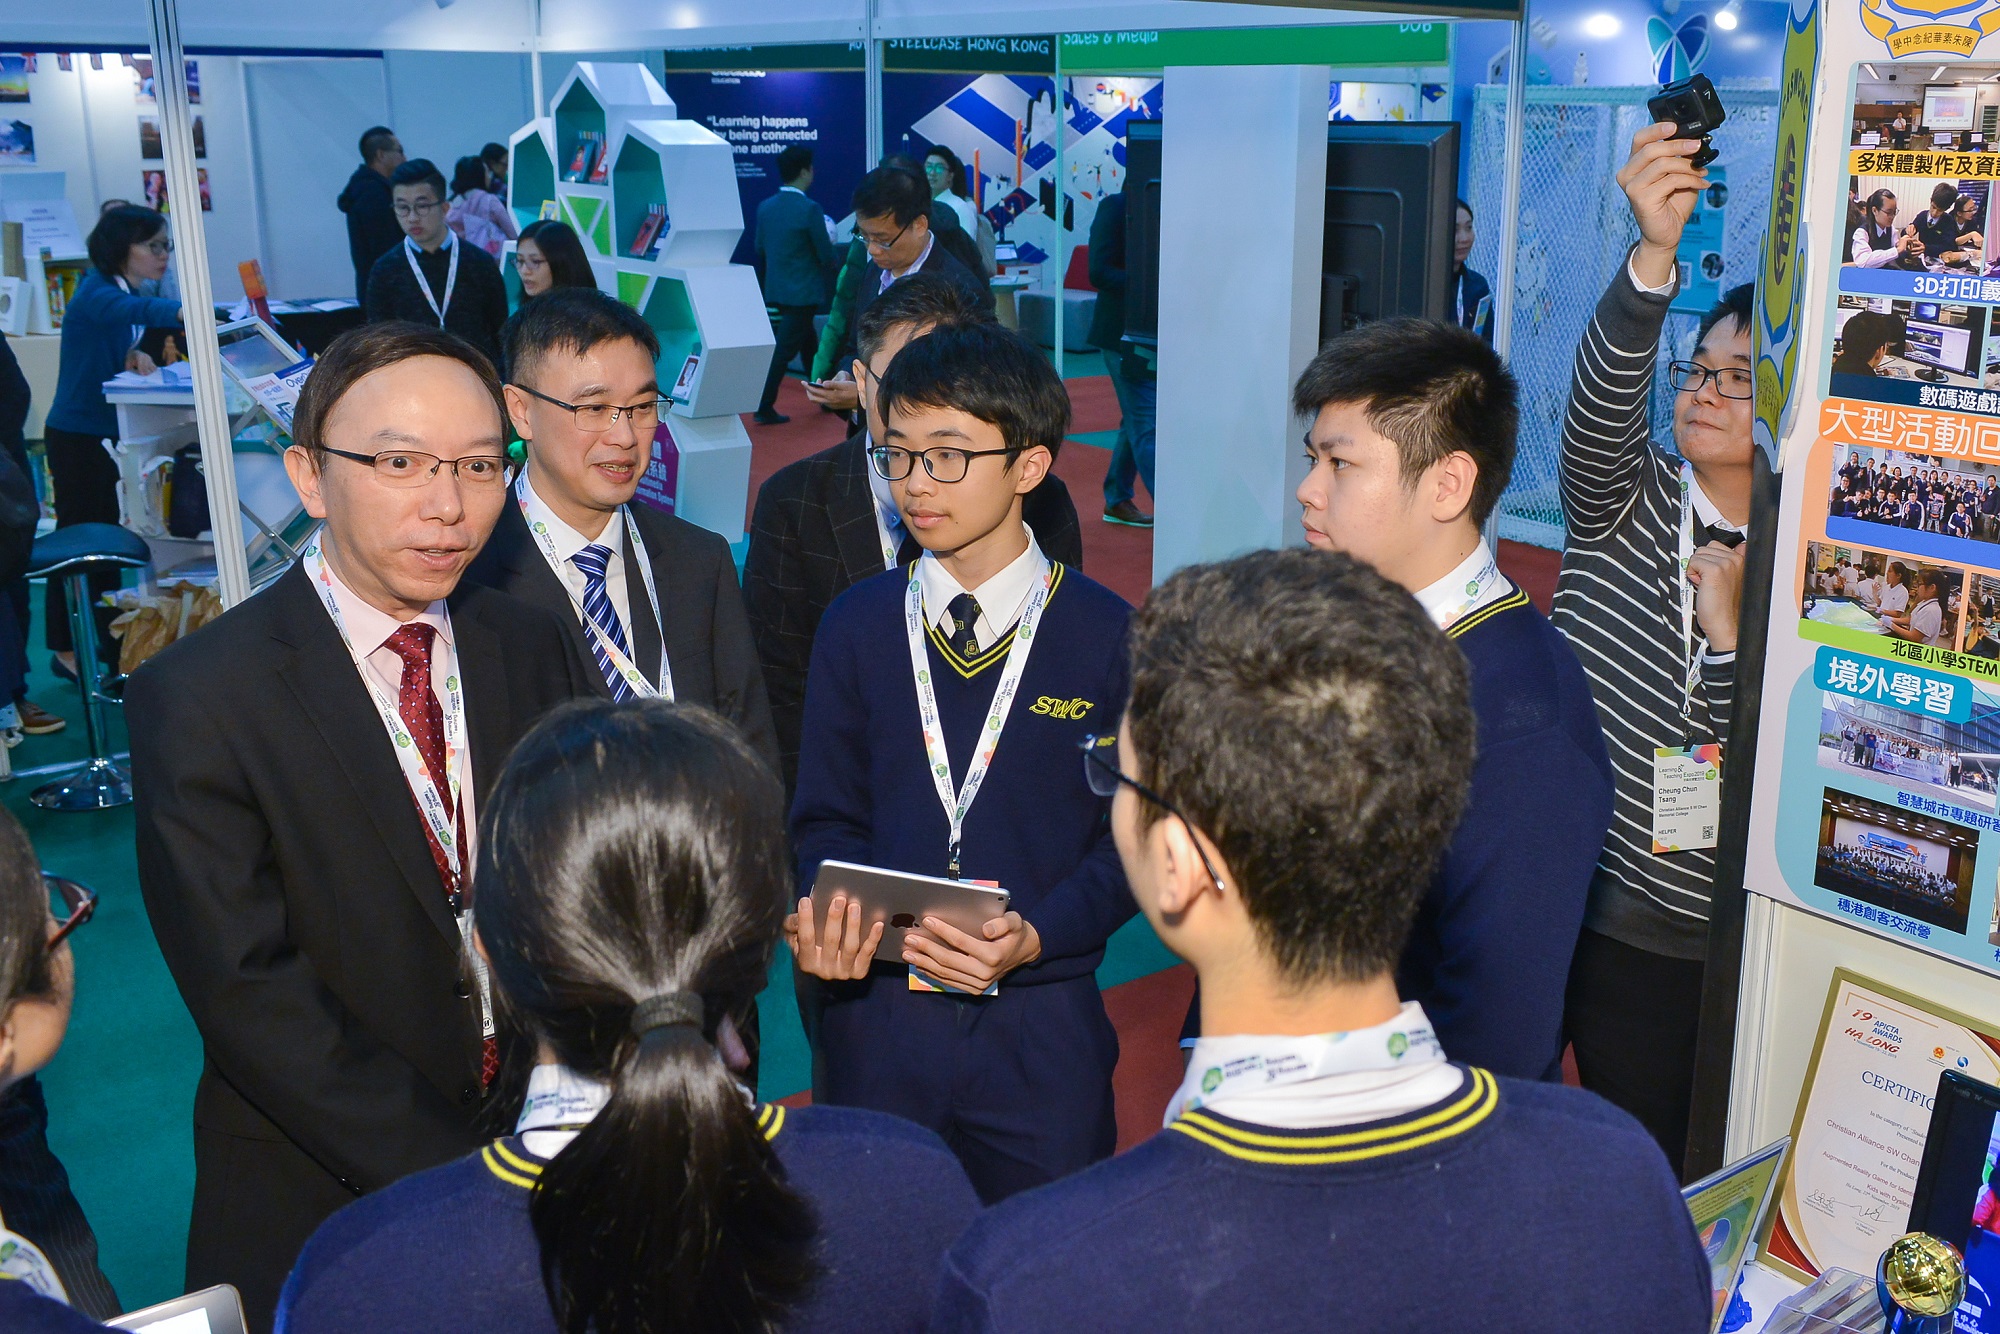 Christian Alliance SW Chan Memorial College demonstrated their “A.I.CAMe” and “Augmented Reality Game for Identifying Early-age School Kids with Dyslexia”.  “A.I.CAMe” won the Gold Award in the HKICT Awards 2019 – Student Innovation Award (Secondary School) and the Merit Award in the APICTA Awards 2019 – Senior Students Project, while the “Augmented Reality Game for Identifying Early-age School Kids with Dyslexia” won the Bronze Award in the HKICT Awards 2019 – Student Innovation Award (Secondary School) and the Merit Award in the APICTA Awards 2019 – Senior Students Project.